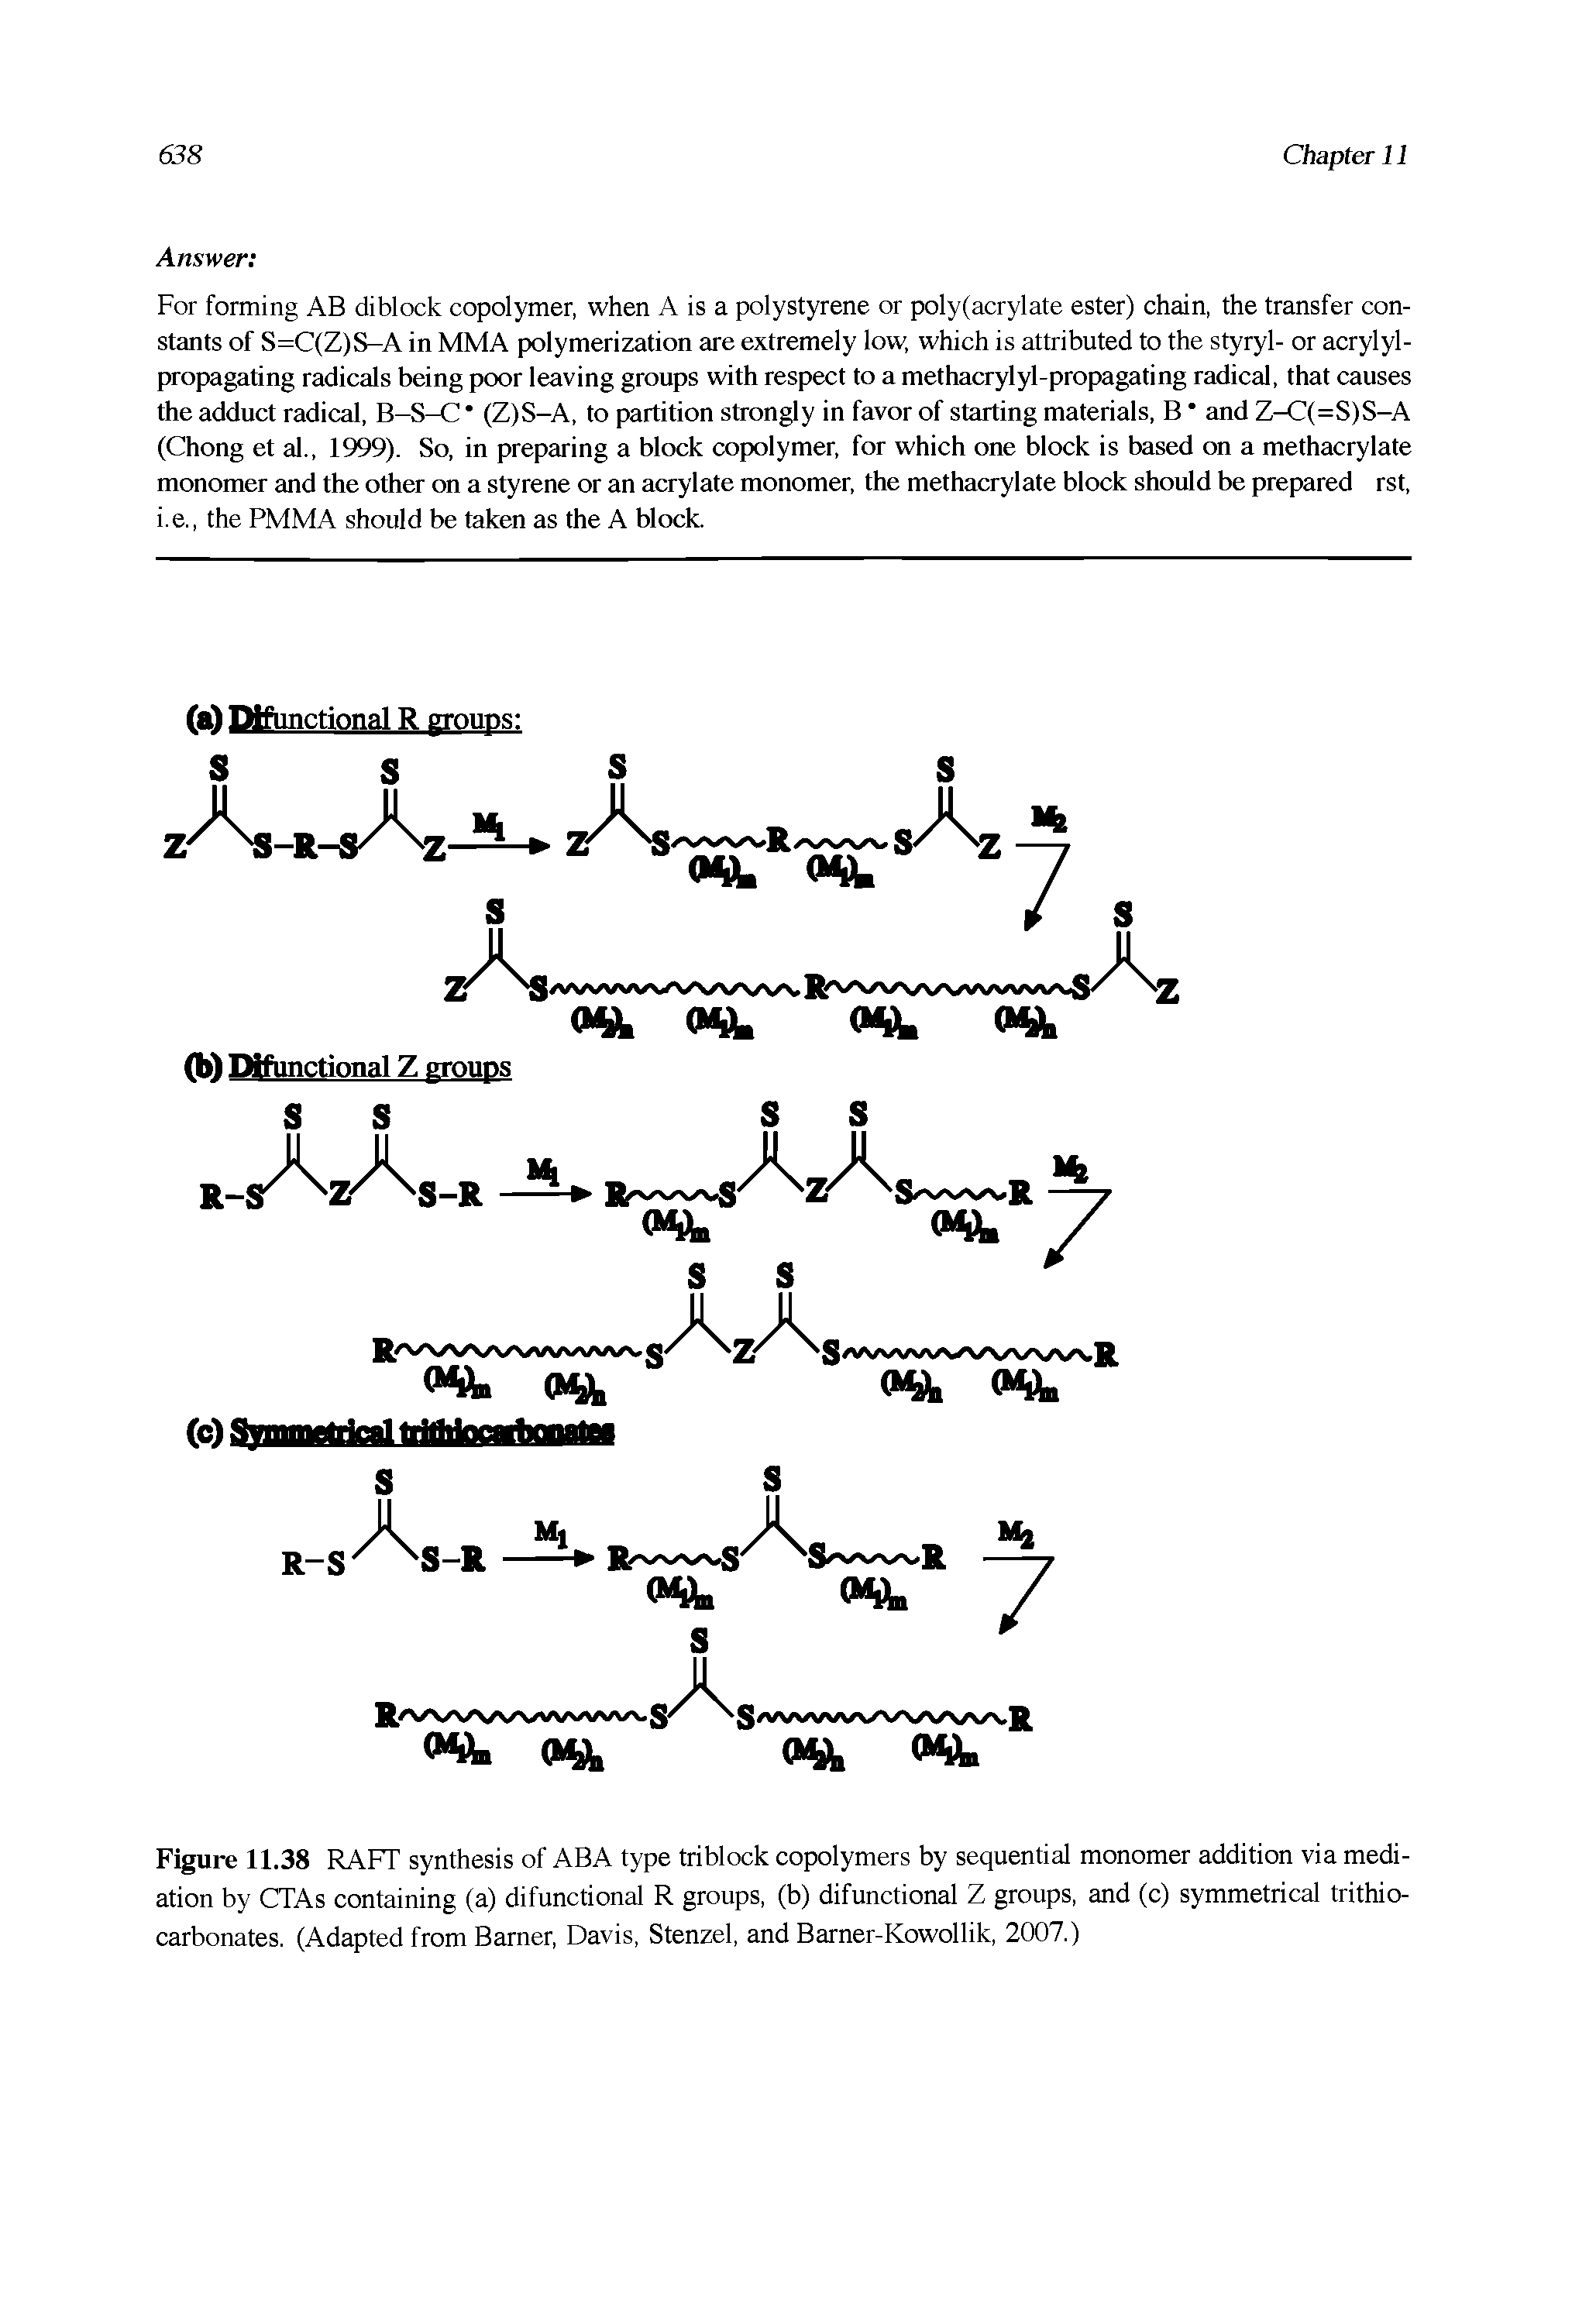 Figure 11.38 RAFT synthesis of ABA type triblock copolymers by sequential monomer addition via mediation by CTAs containing (a) difunctional R groups, (b) difunctional Z groups, and (c) symmetrical trithio-carbonates. (Adapted from Bamer, Davis, Stenzel, and Barner-Kowollik, 2007.)...